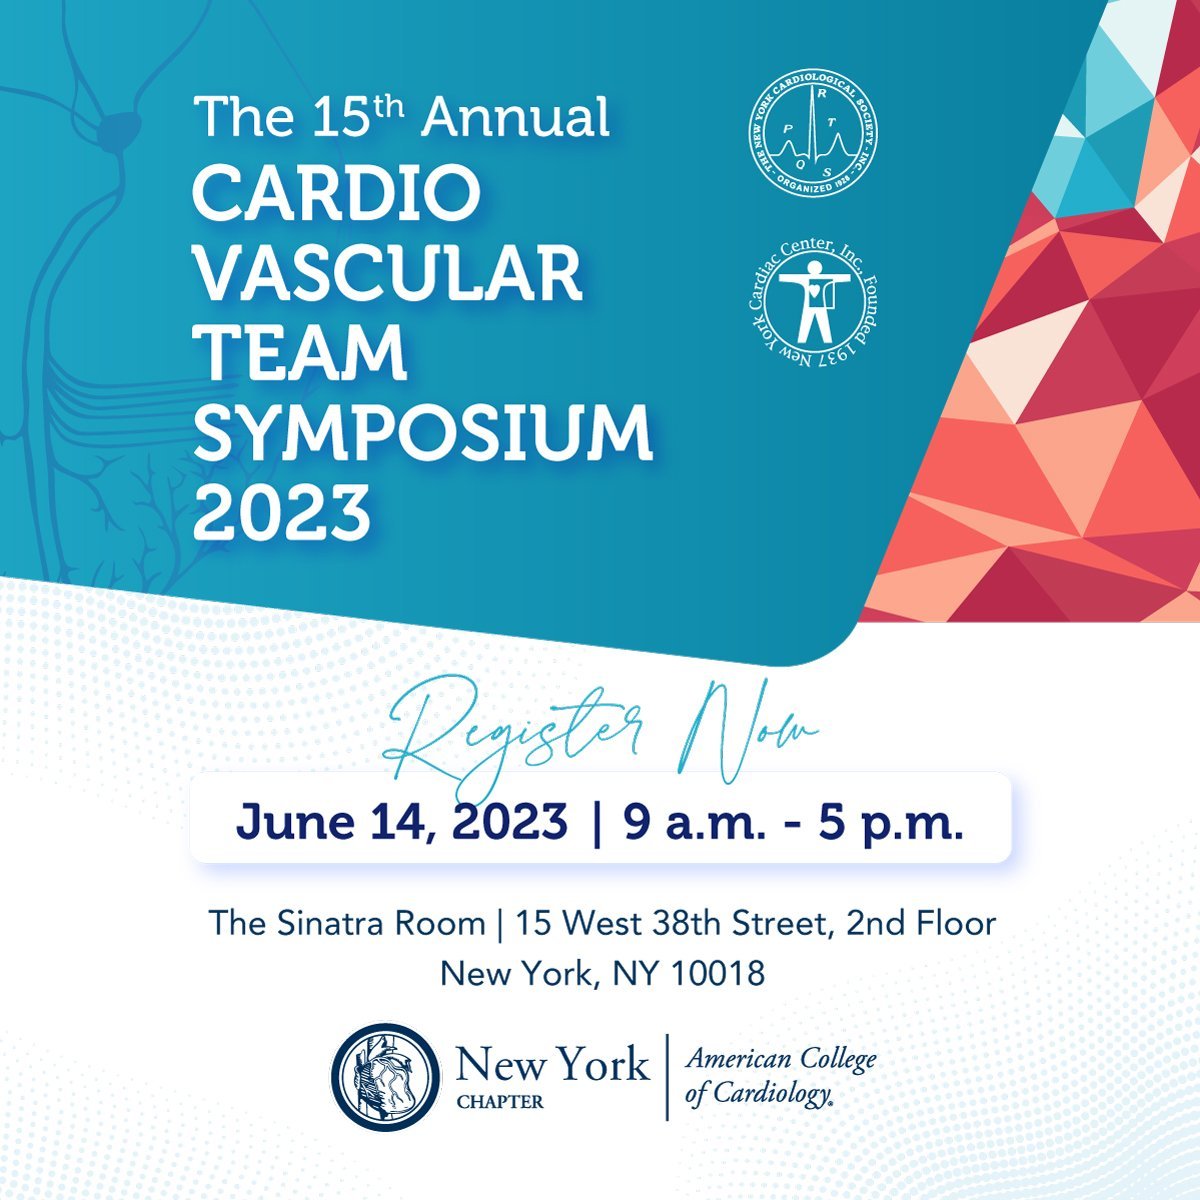 Calling all #CV Team members (nurses, techs, sonographers, NPs, PAs and more)! Put in for an education day and come to our annual CVT Symposium in #NYC. It's a full day of talks, followed by networking! Register here: ny-acc.org/cvt-2023/ #ACCchapters #ACCCVT